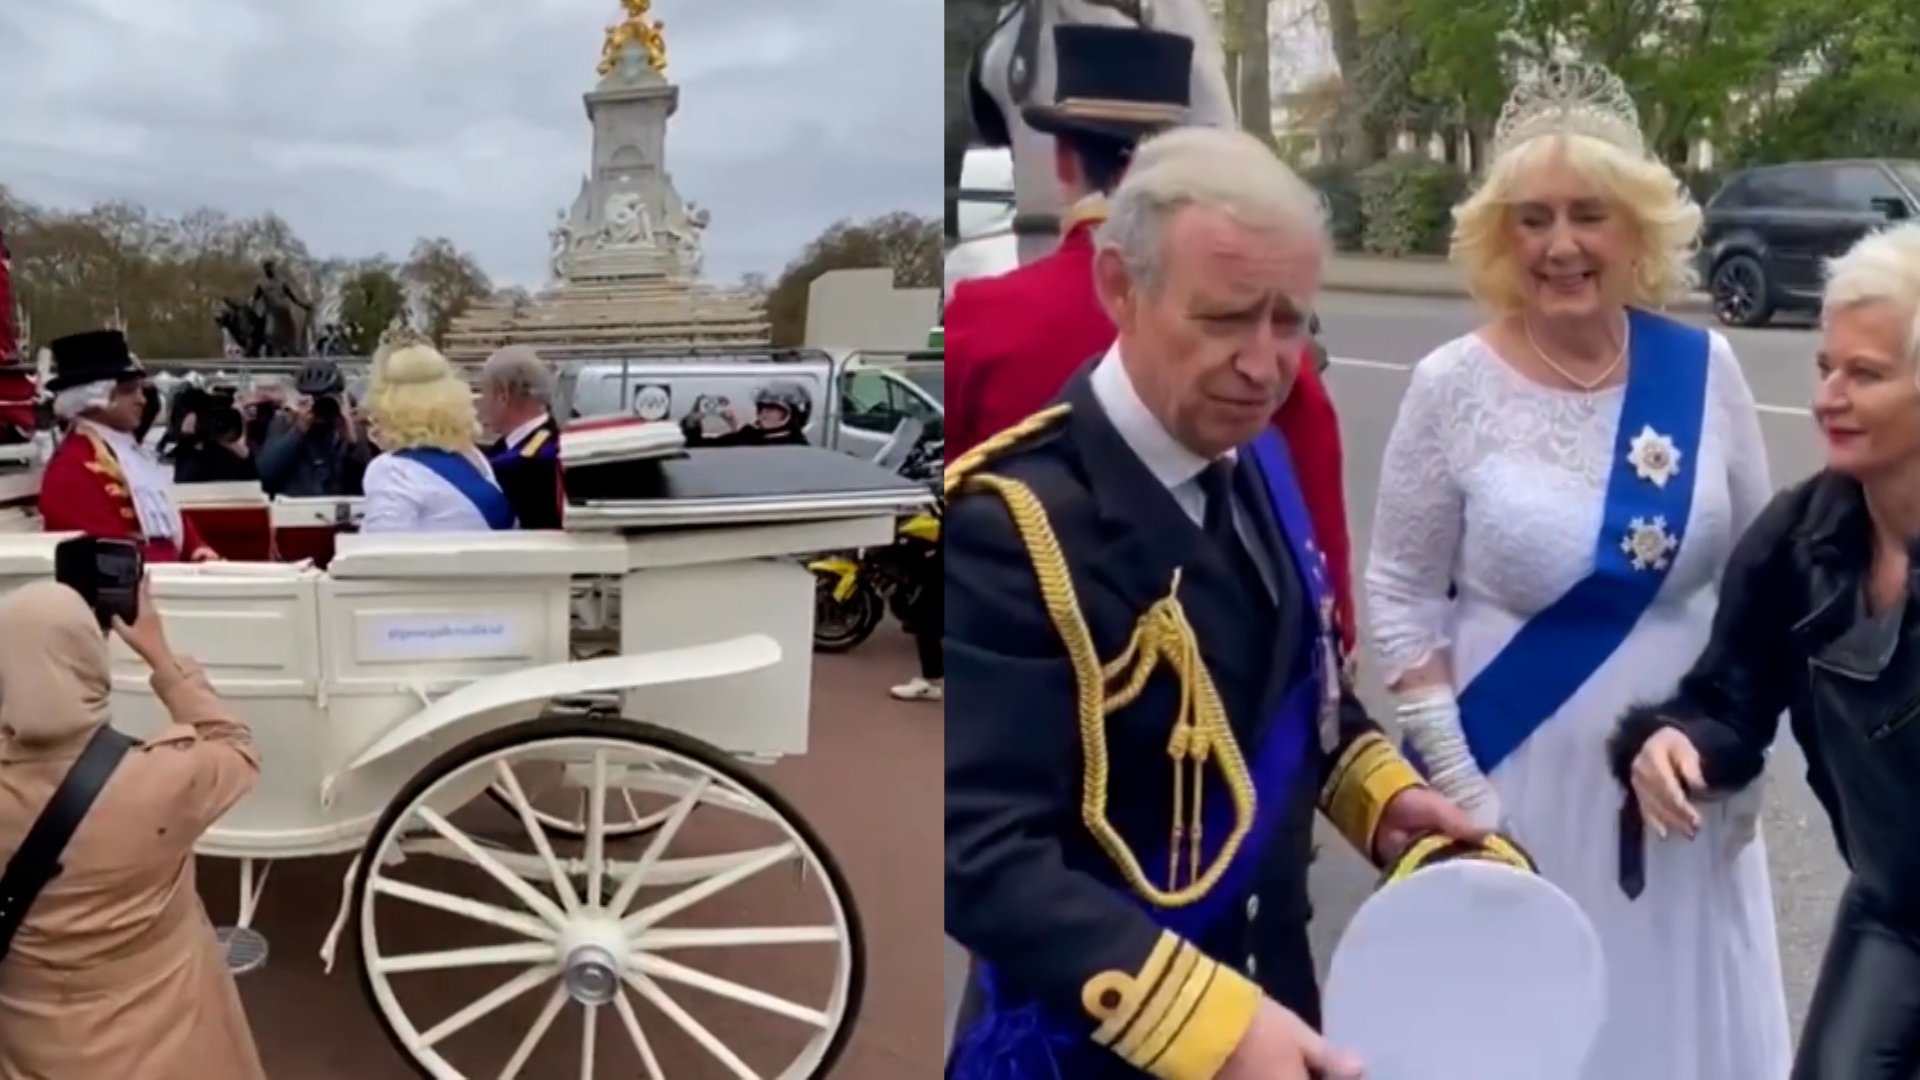 Fake royal procession with King Charles and Camila look-alikes tricks thousands of fans in London